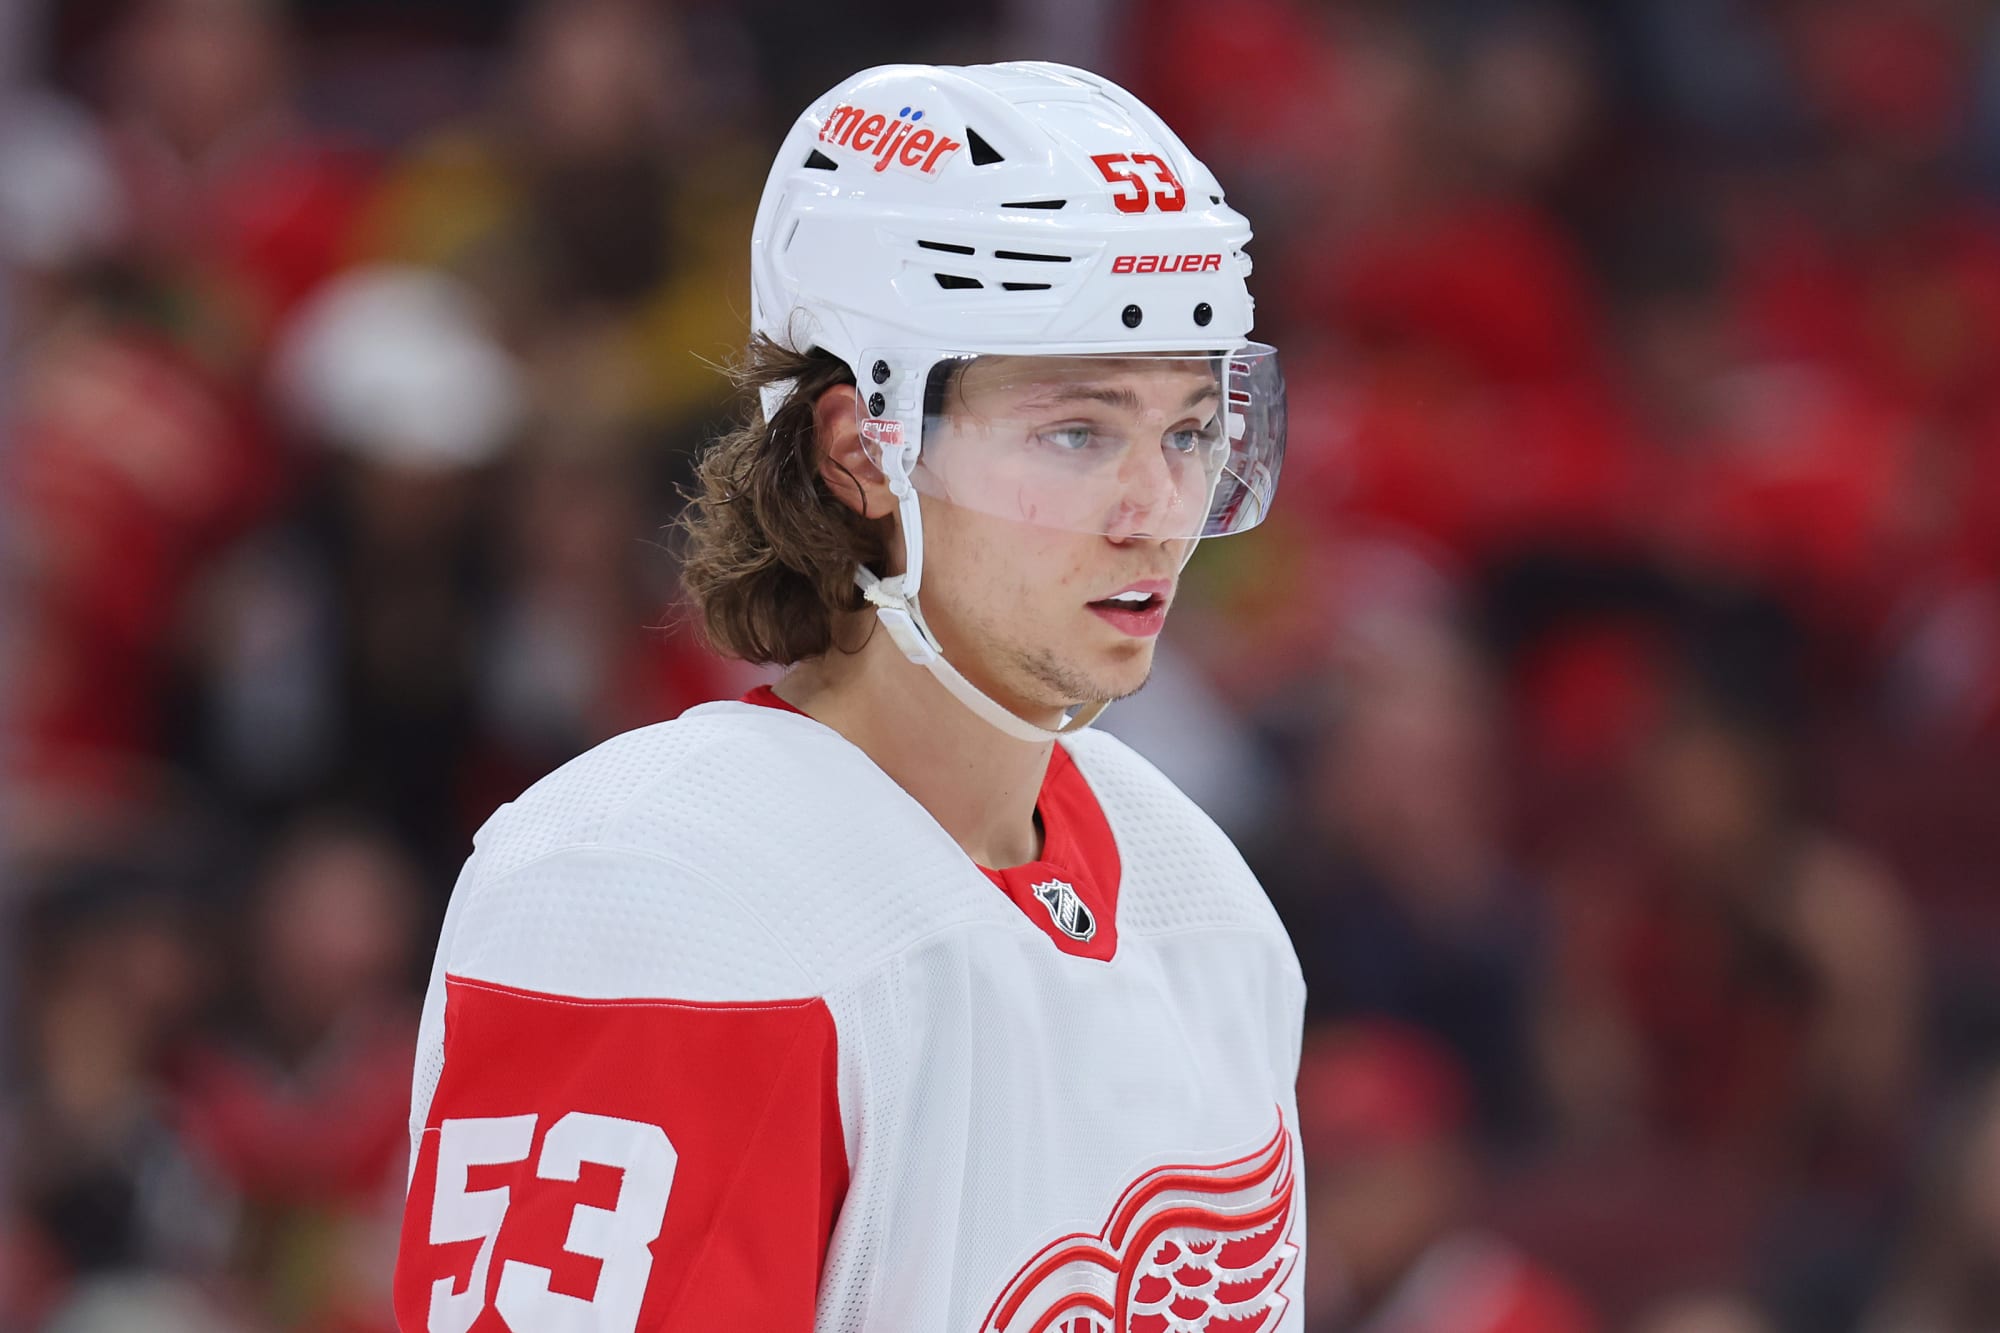 Detroit Red Wings: Moritz Seider is going to be a force in Hockeytown